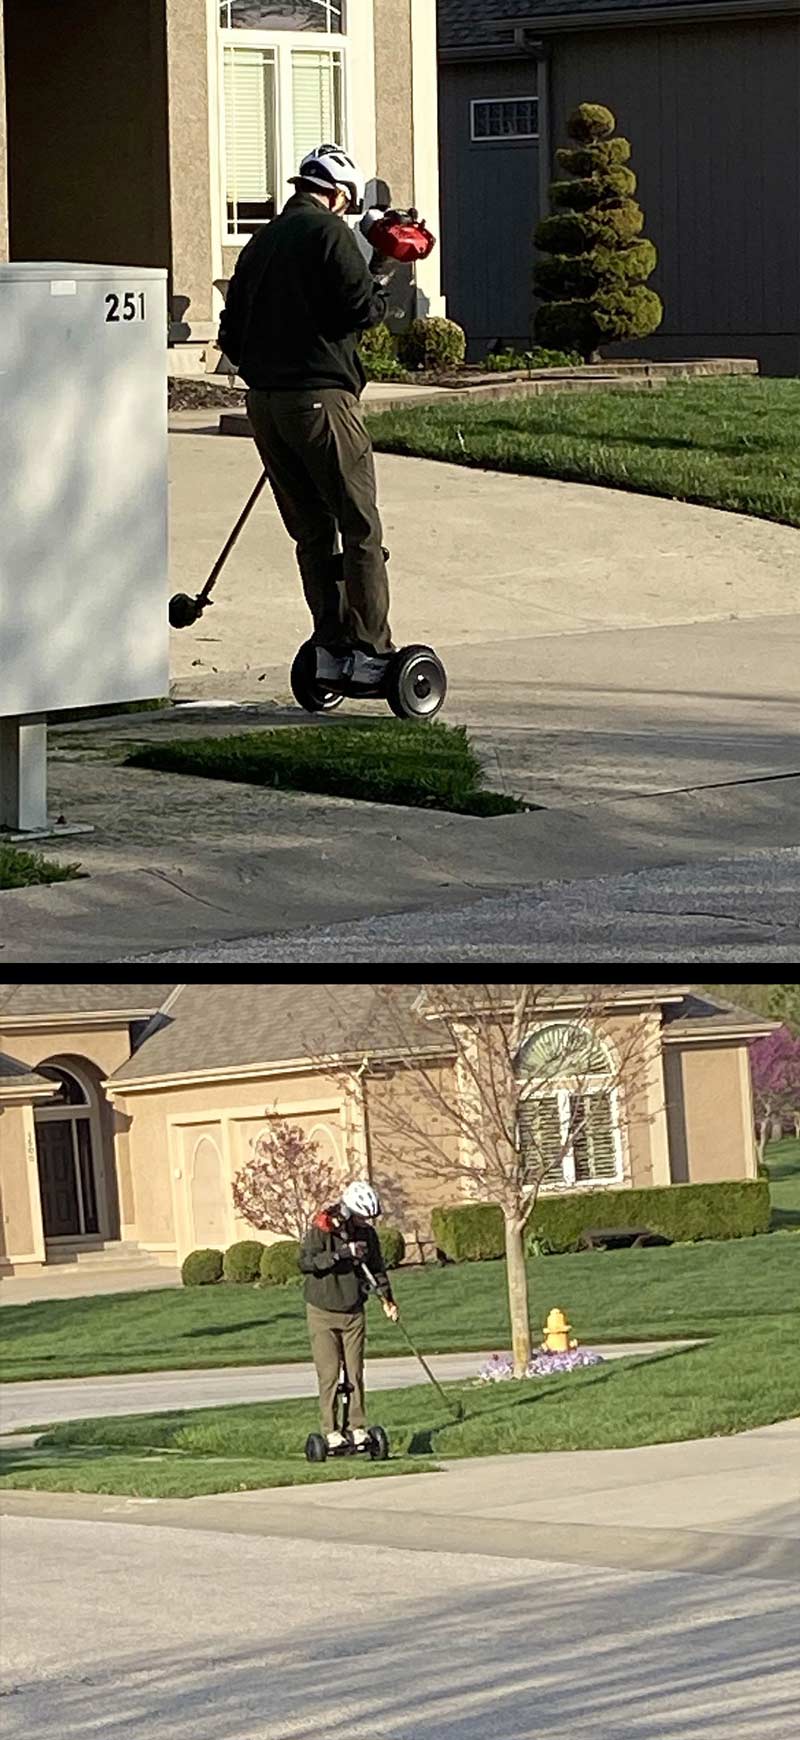 Just a guy weed eating on a hoverboard